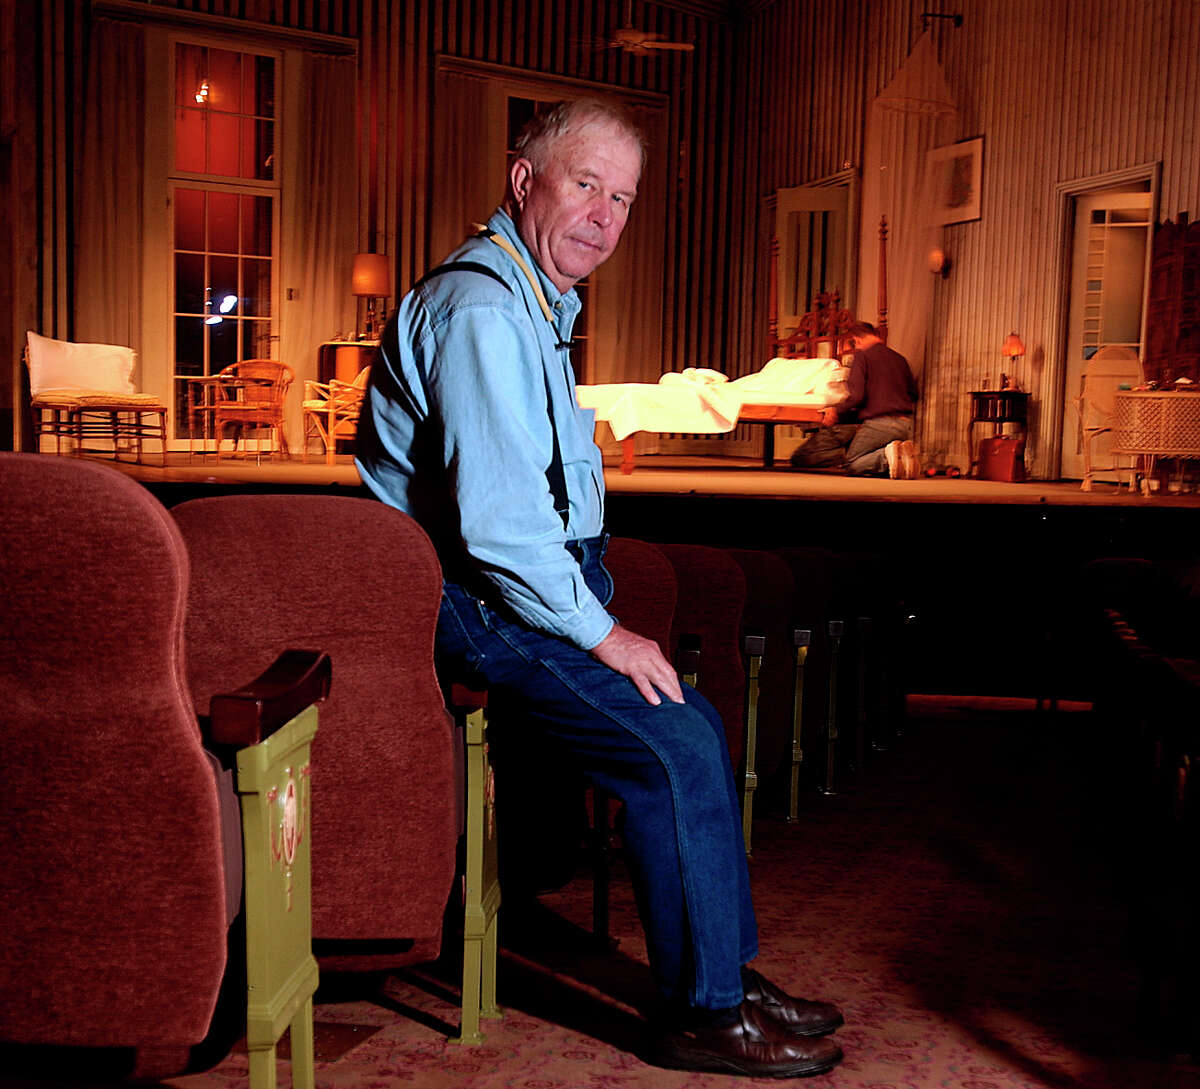 In this Oct. 17, 2003, file photo, actor Ned Beatty poses at New York's Music Box Theatre where he plays the role of Big Daddy in a new production of Tennessee Williams' "Cat on a Hot Tin Roof." Beatty, the indelible character actor whose first film role, as a genial vacationer brutally raped by a backwoodsman in 1972′s “Deliverance,” launched him on a long, prolific and accomplished career, died Sunday, June 13, 2021. He was 83.